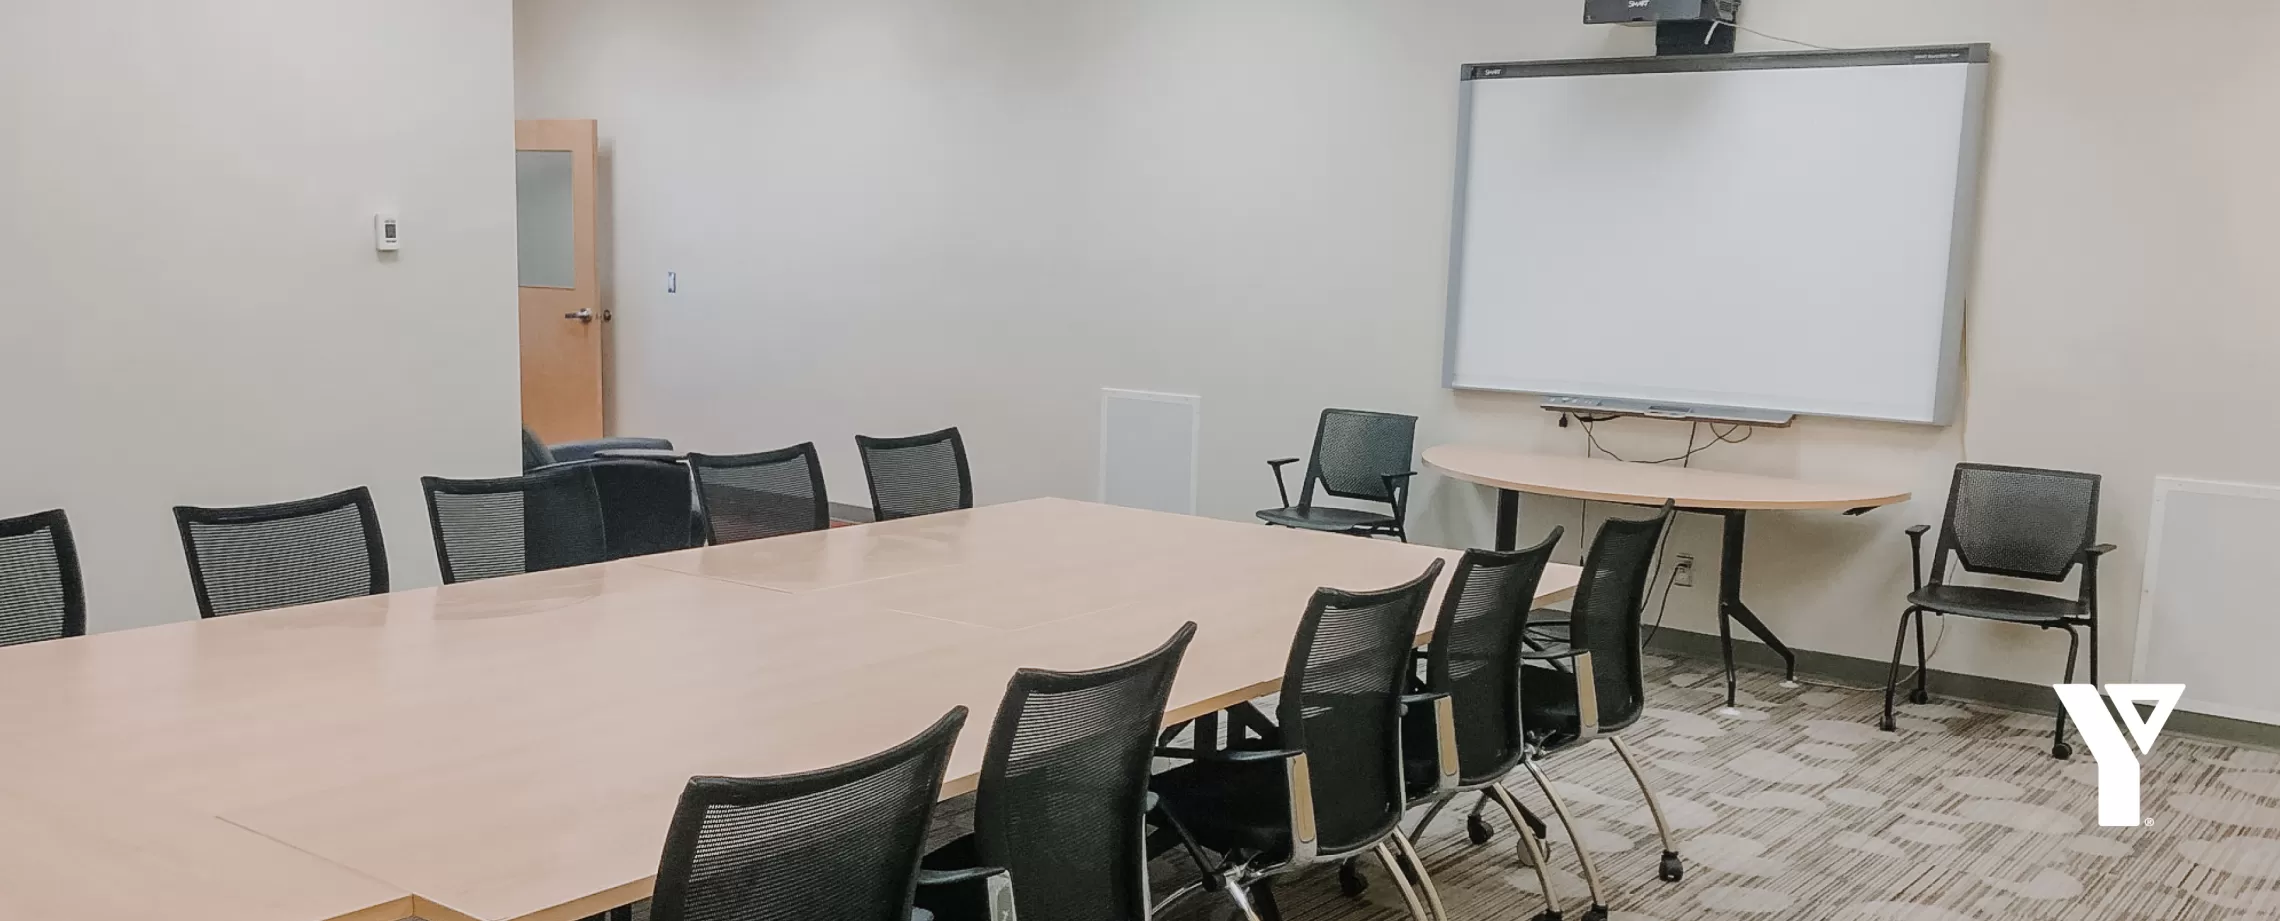 A brightly lit room featuring a SMART board attached to a wall, with a large table with numerous chairs around it in the middle.